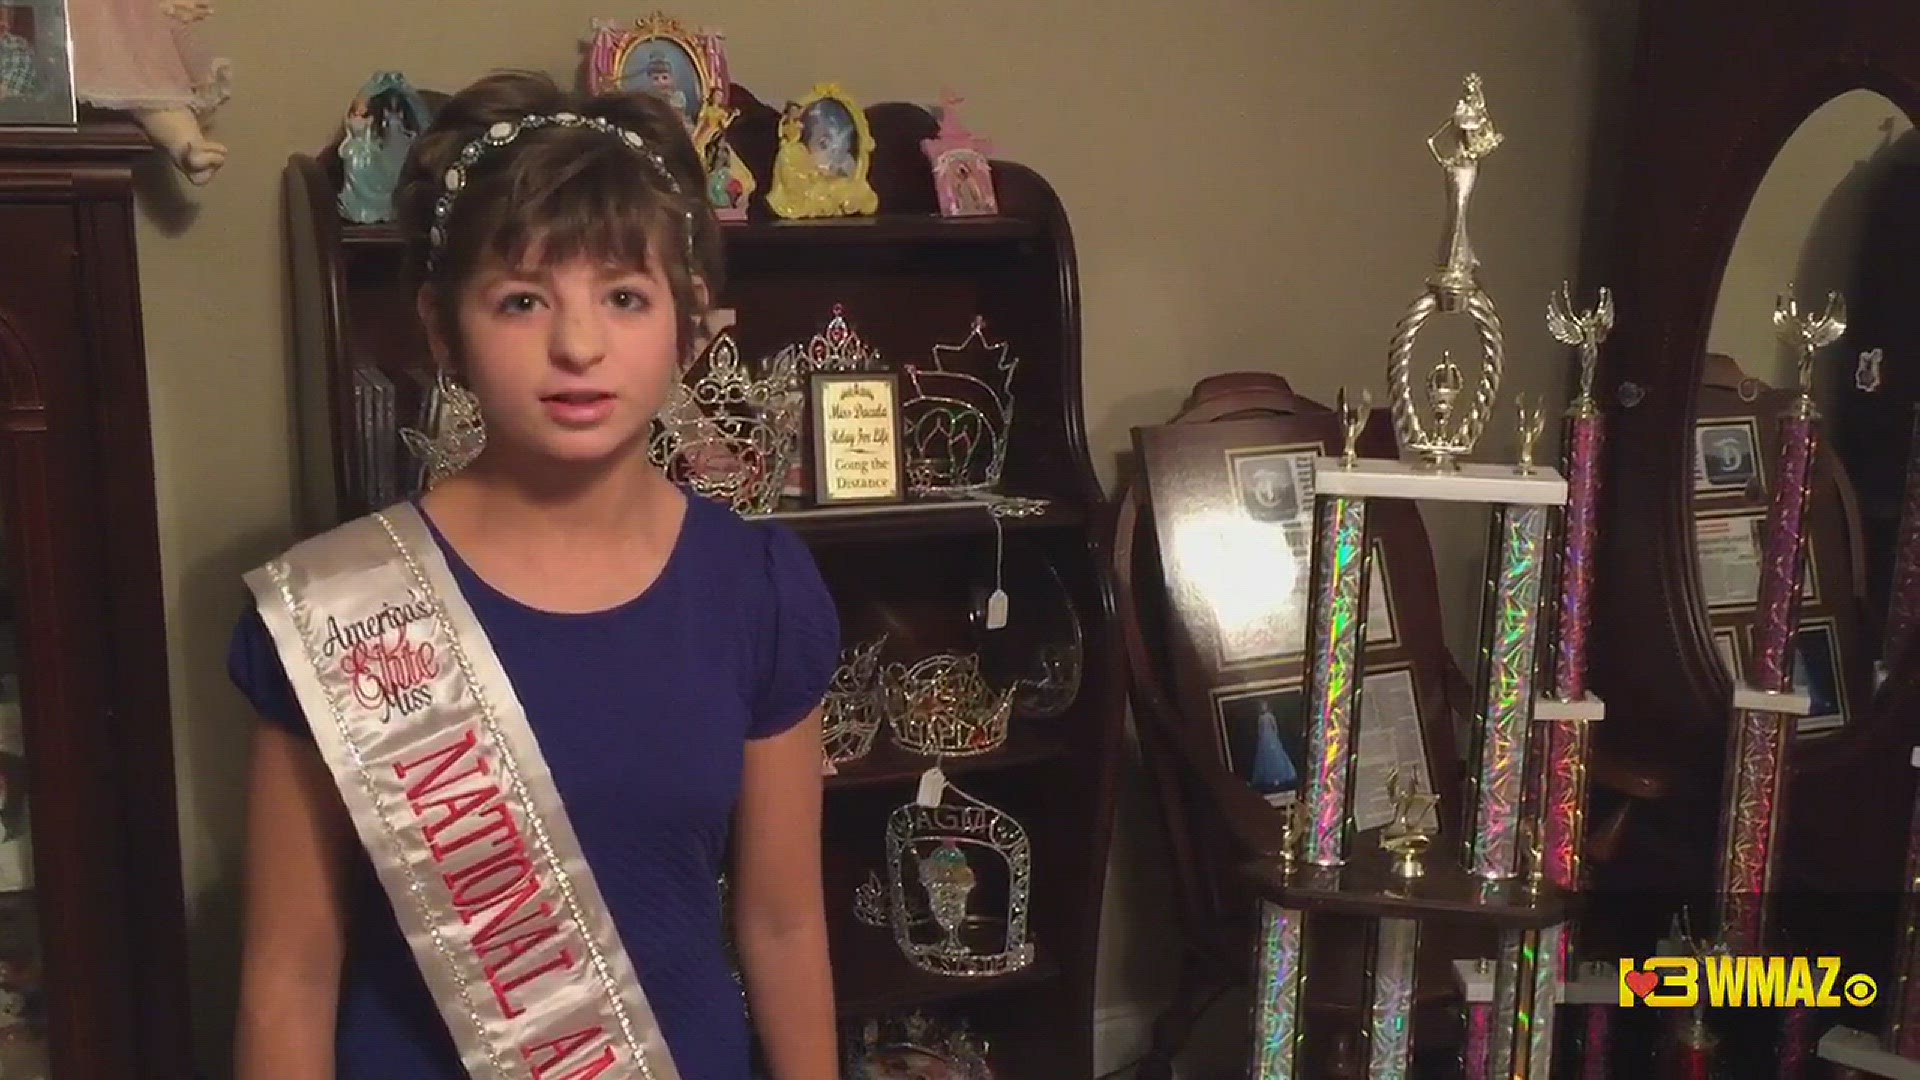 Kelsey Norris was adopted from Russia. She also has autism. That hasn't stopped her from being an active member in her community. She does pageants and service projects. She was recently named the top middle school volunteer in Georgia by the 2017 Prudent